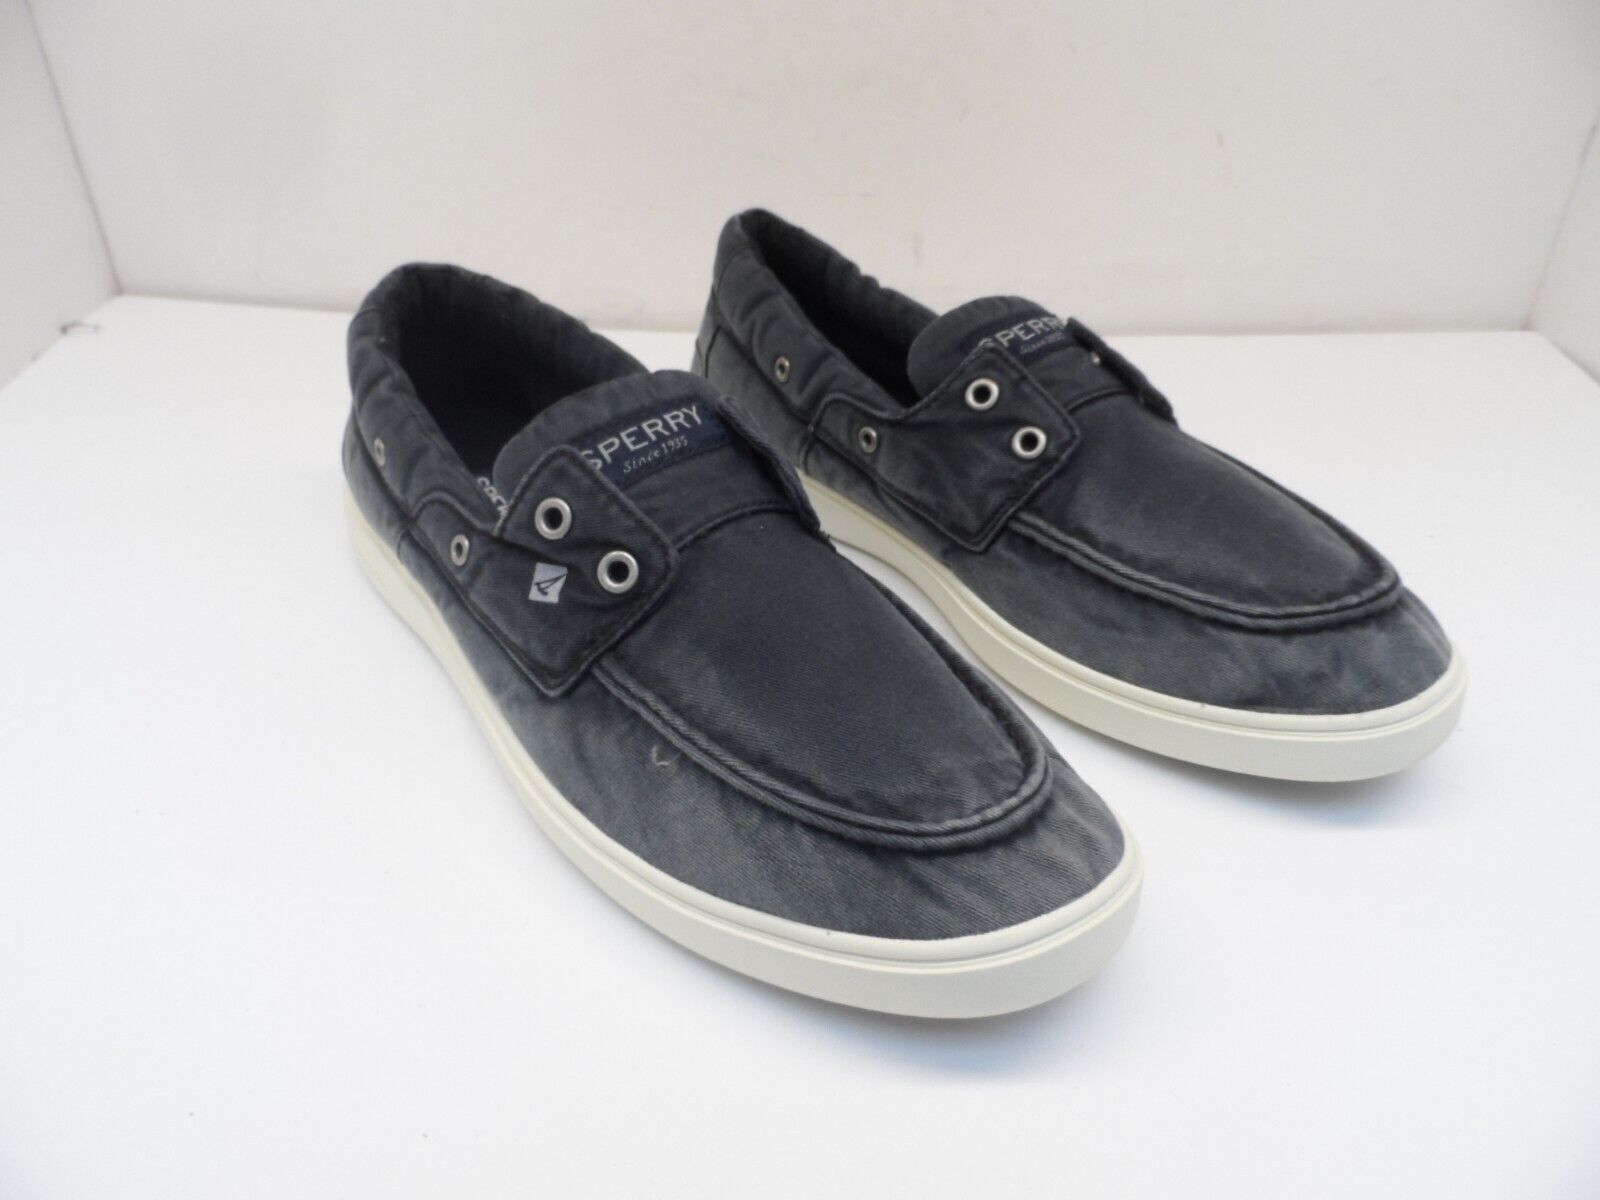 Primary image for Sperry Top Sider Men's STS23750 Outter Banks 2 Eye Boat Shoe Black Size 7.5M